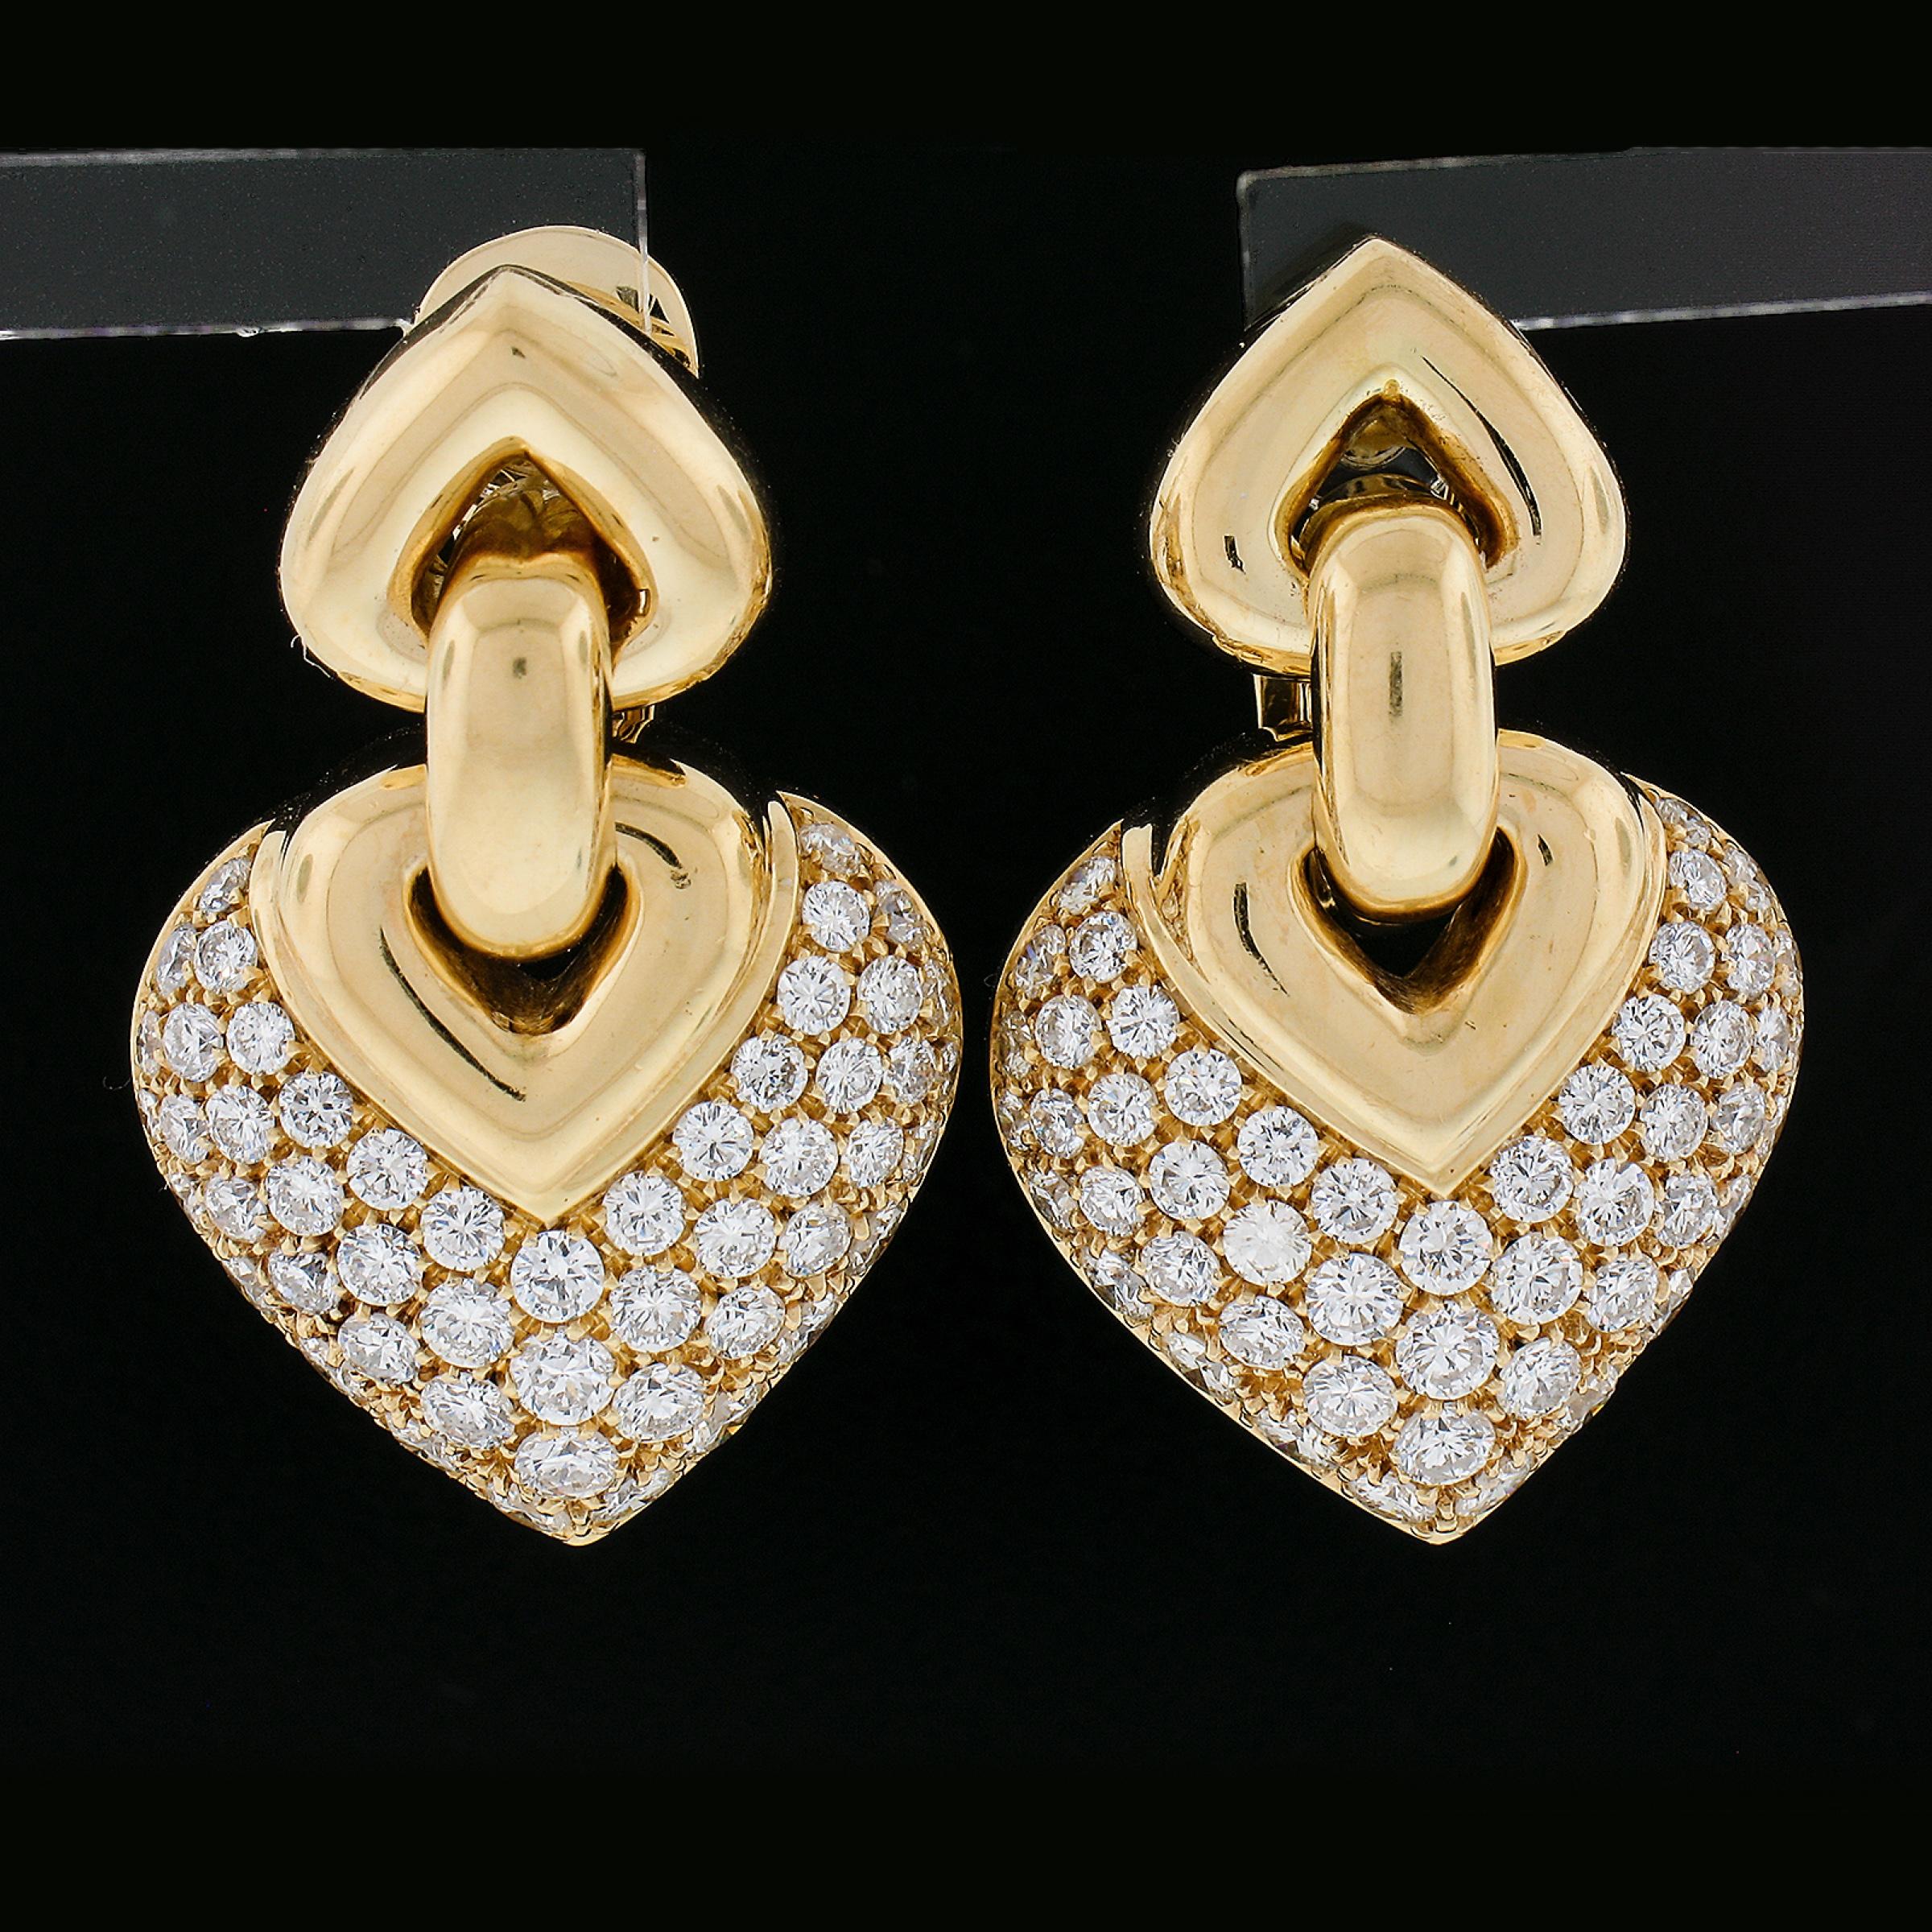 The large flawless diamonds sizzle in rich gleaming 18k gold and are perfectly and meticulously pave set with unparalleled precision. 4.08 carats of the finest quality, colorless and near flawless diamonds that are incredibly sparkly and brilliant.